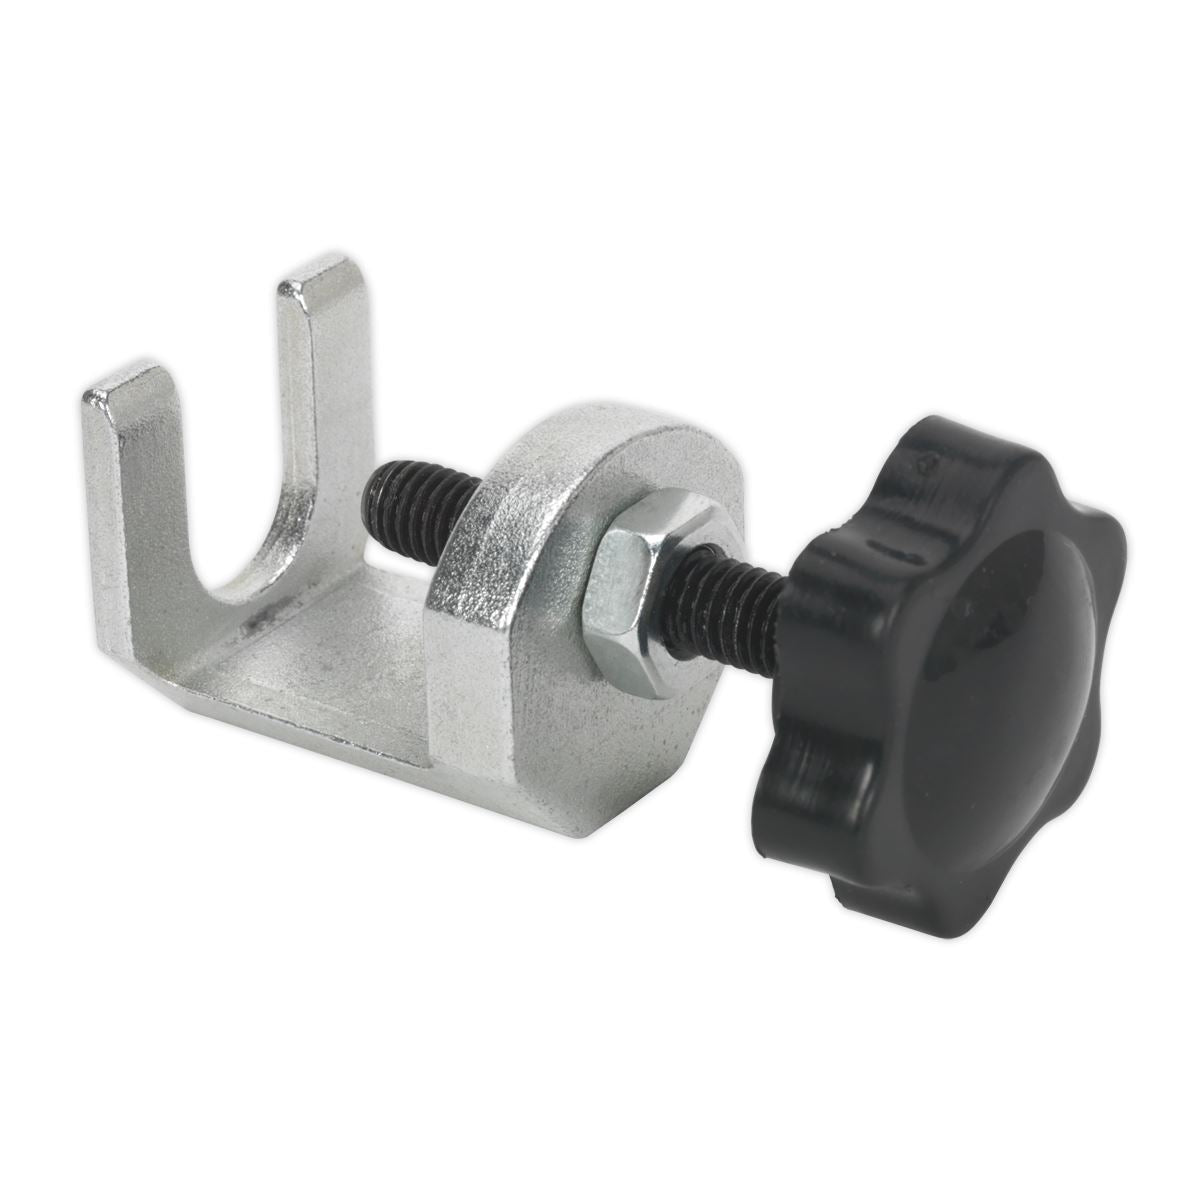 Sealey Wiper Arm Removal Tool